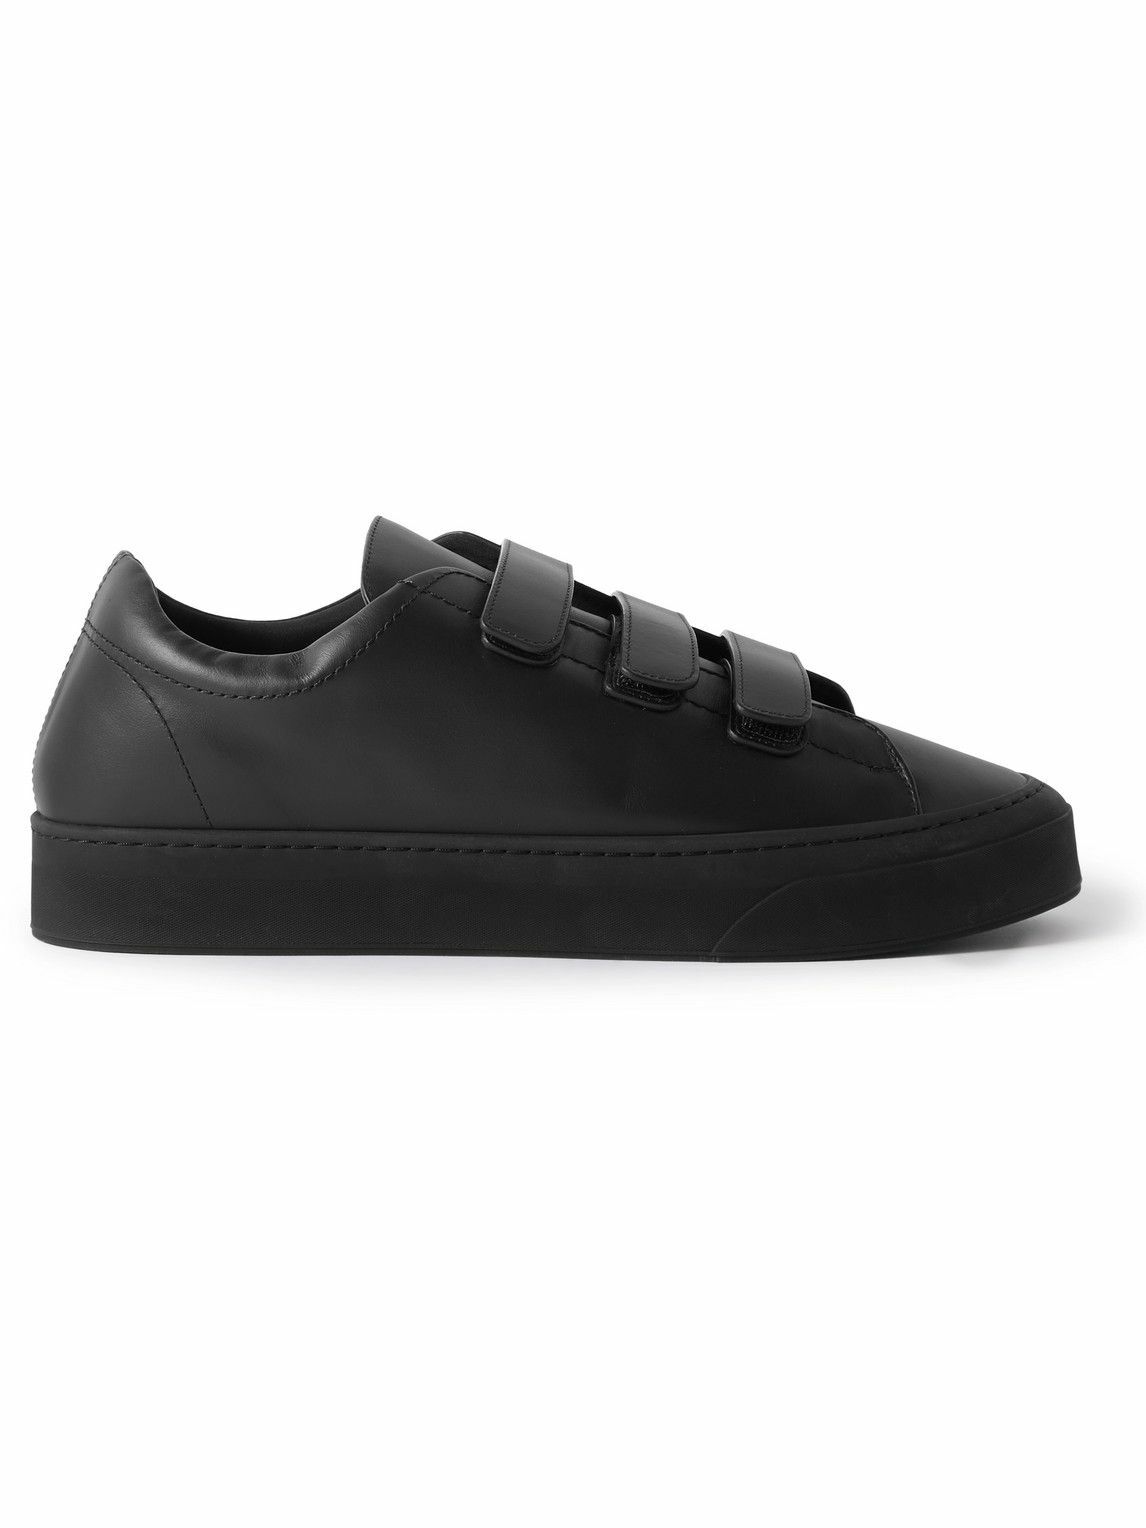 The Row - Dean Leather Sneakers - Black The Row